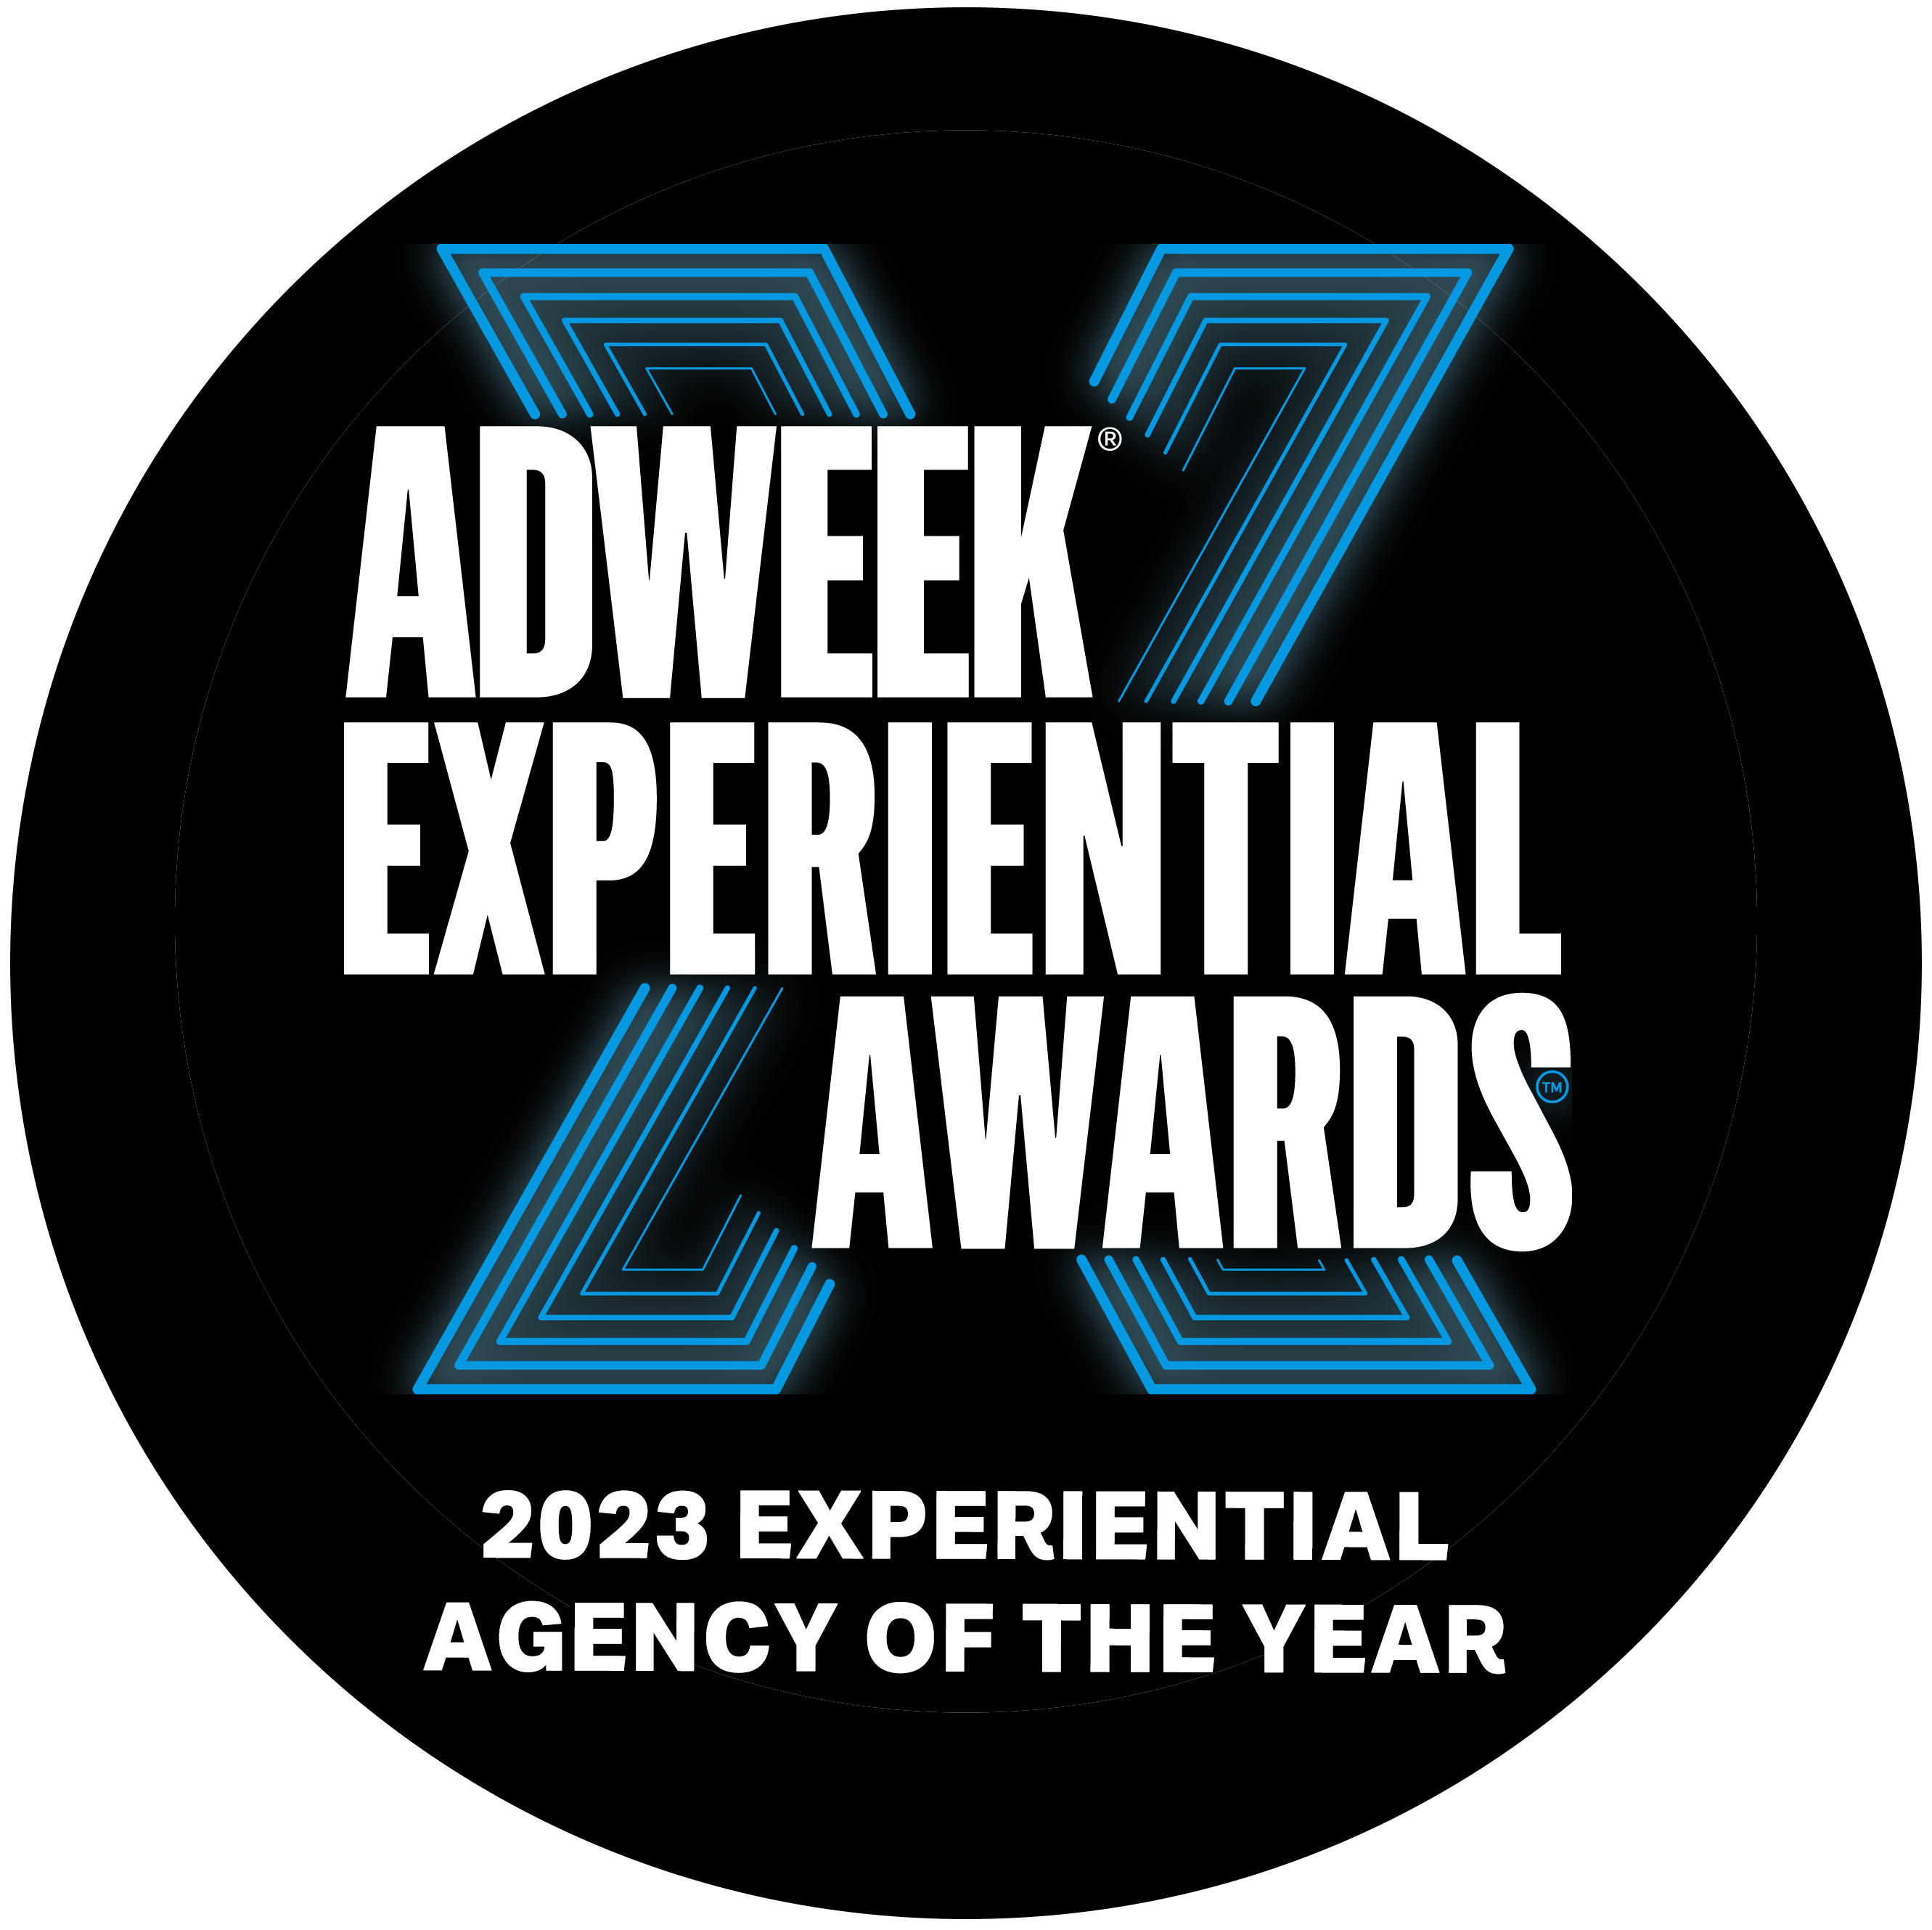 Experiential Marketing Agency of the year logo for Jack Morton Brand Experience agency